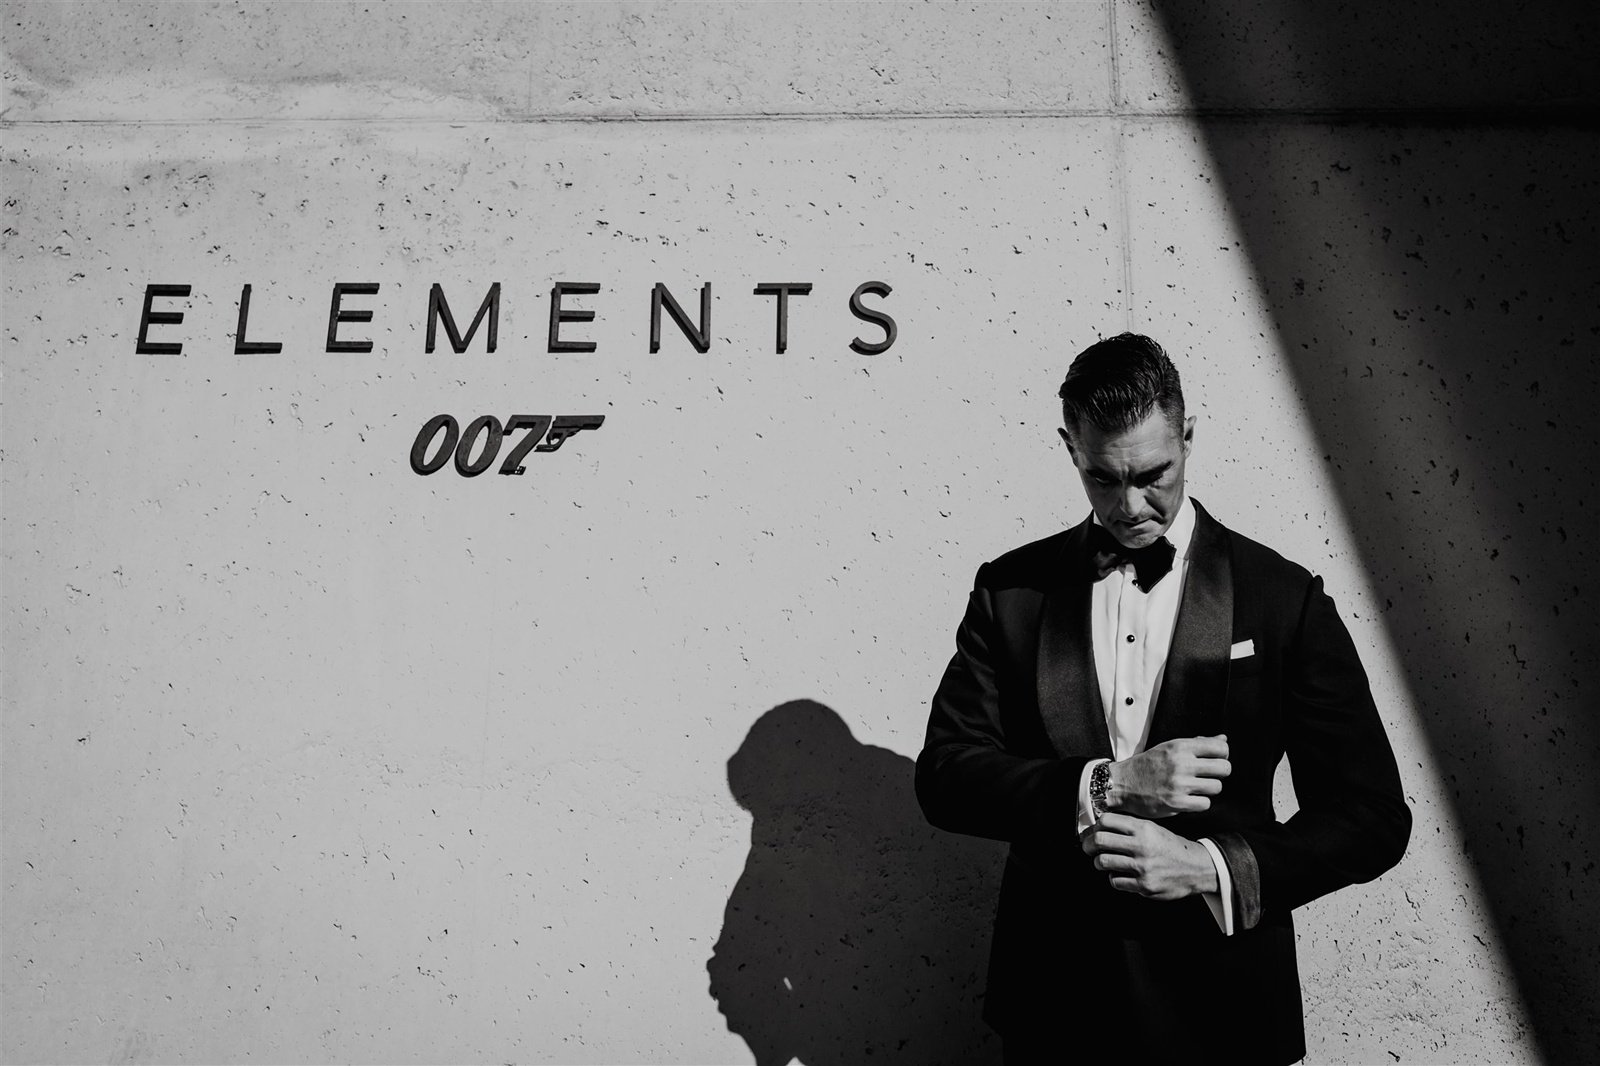 Groom in a black tuxedo standing by a concrete wall with 007 elements written on it